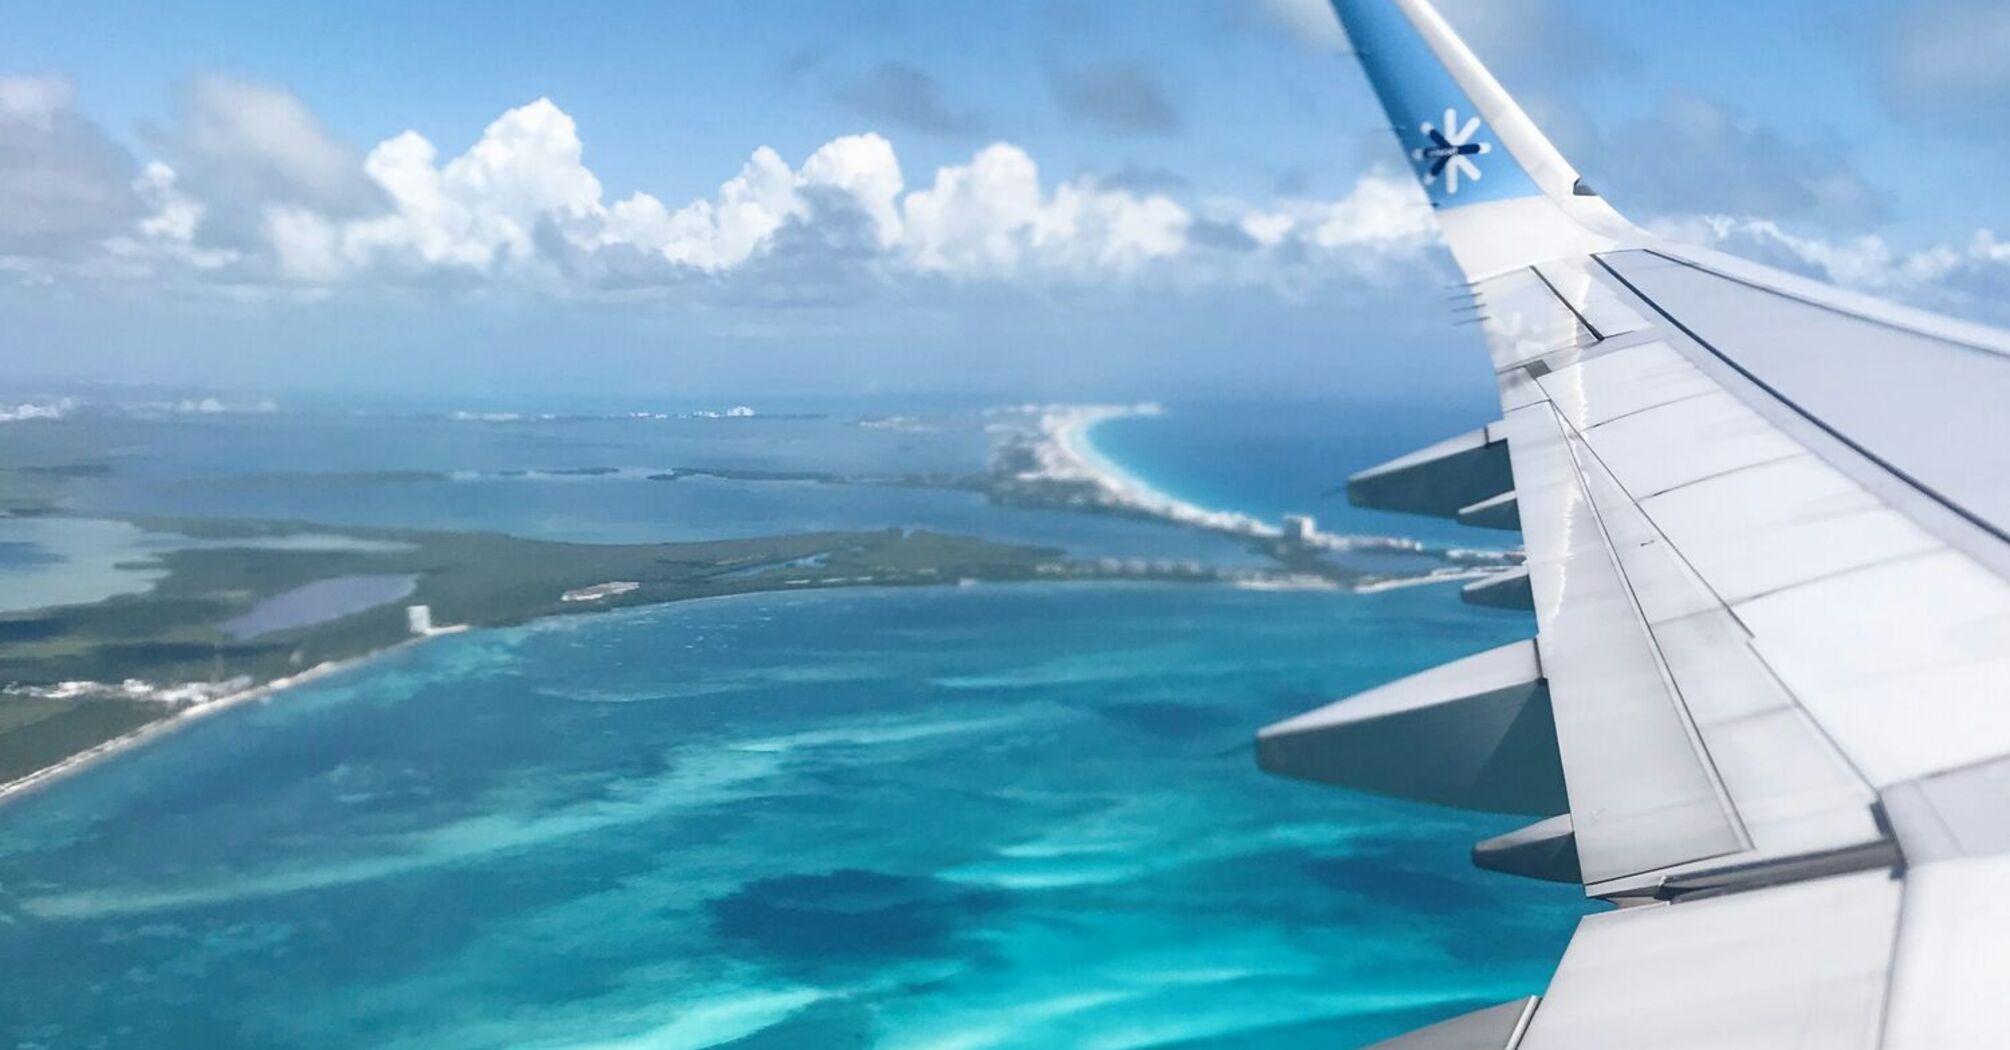 View of the crystal-clear turquoise waters of the Caribbean Sea from an airplane wing, with small islands near Cancún